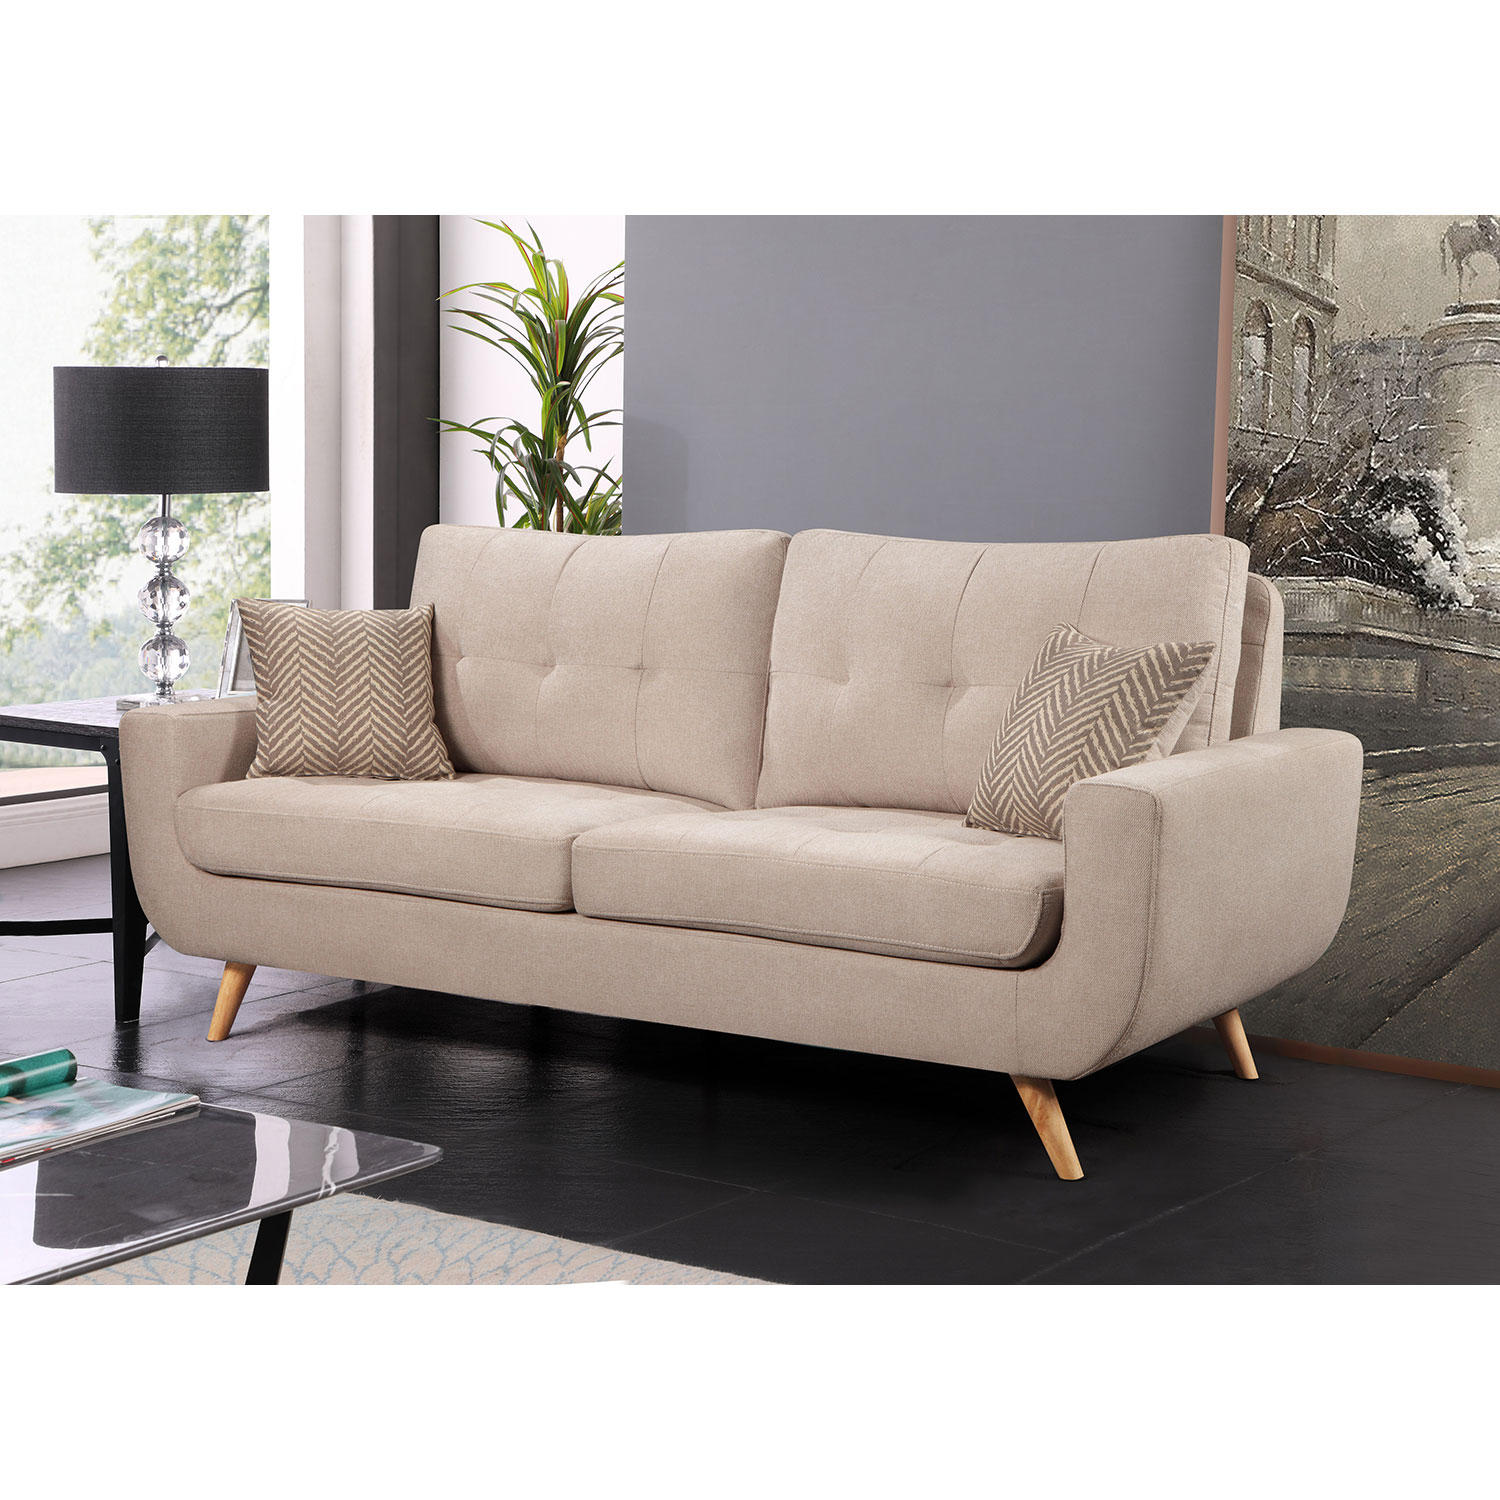 Abbyson Living Finley Stain-Resistant Fabric Sofa